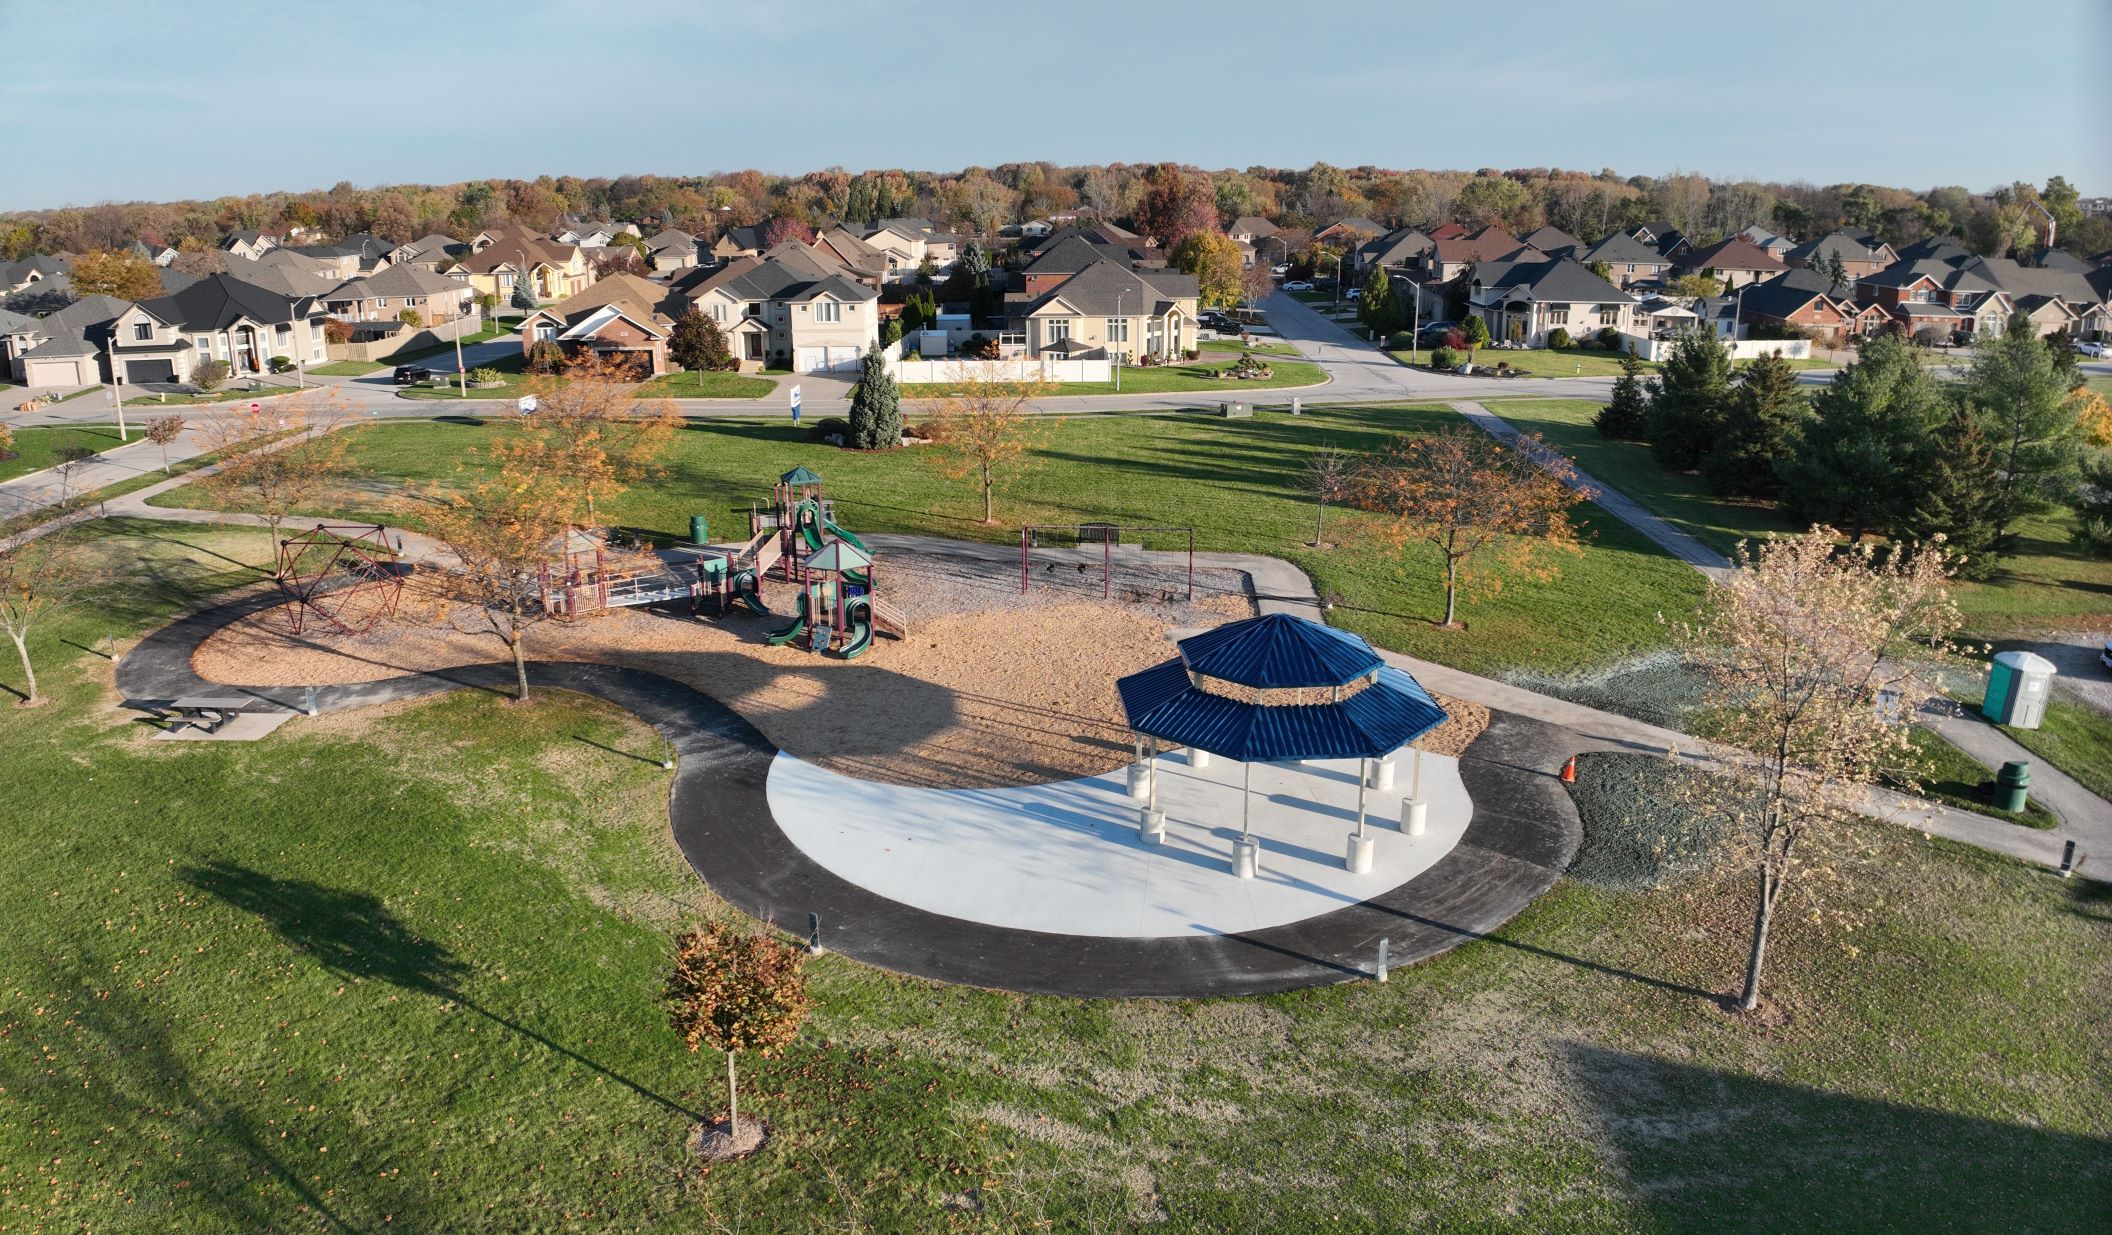 Aerial image of new pavilion and play structure at St. Clair Shores Park